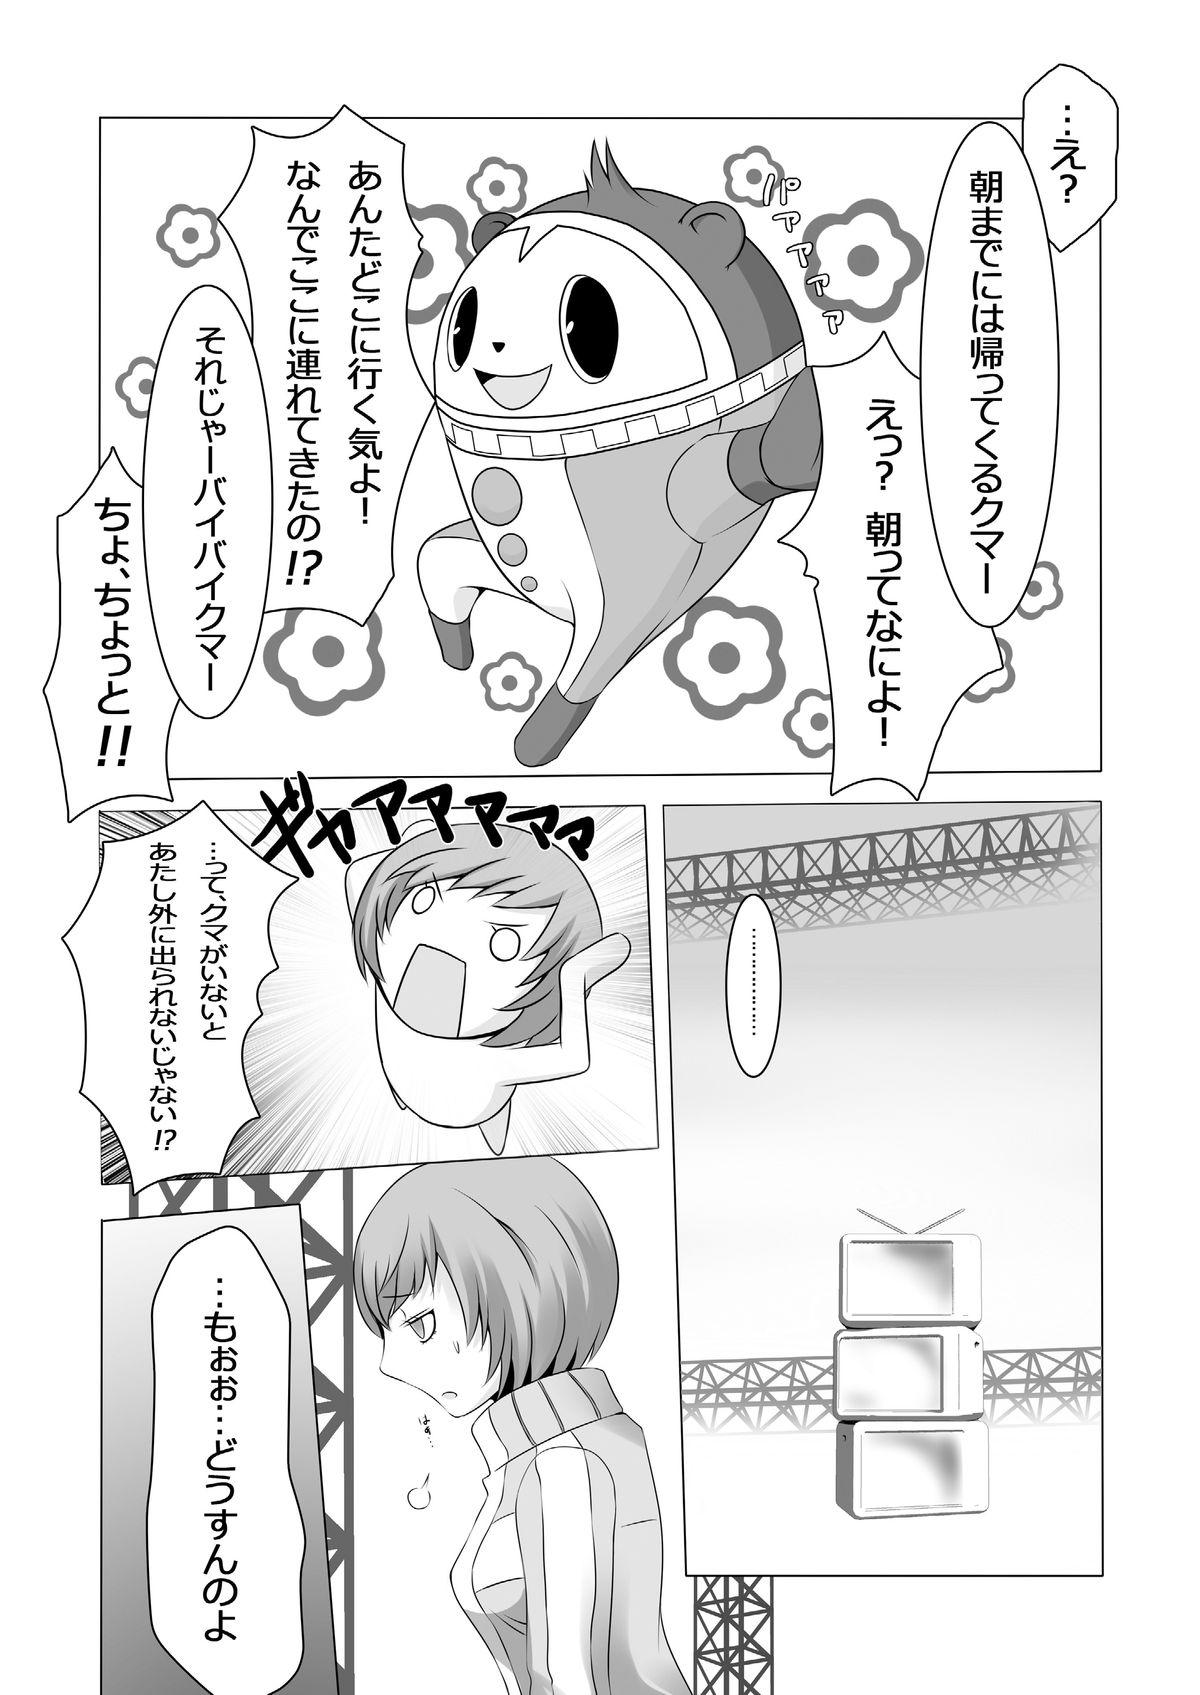 Lady Persona 4: The Doujin #2 - Persona 4 Socks - Page 11